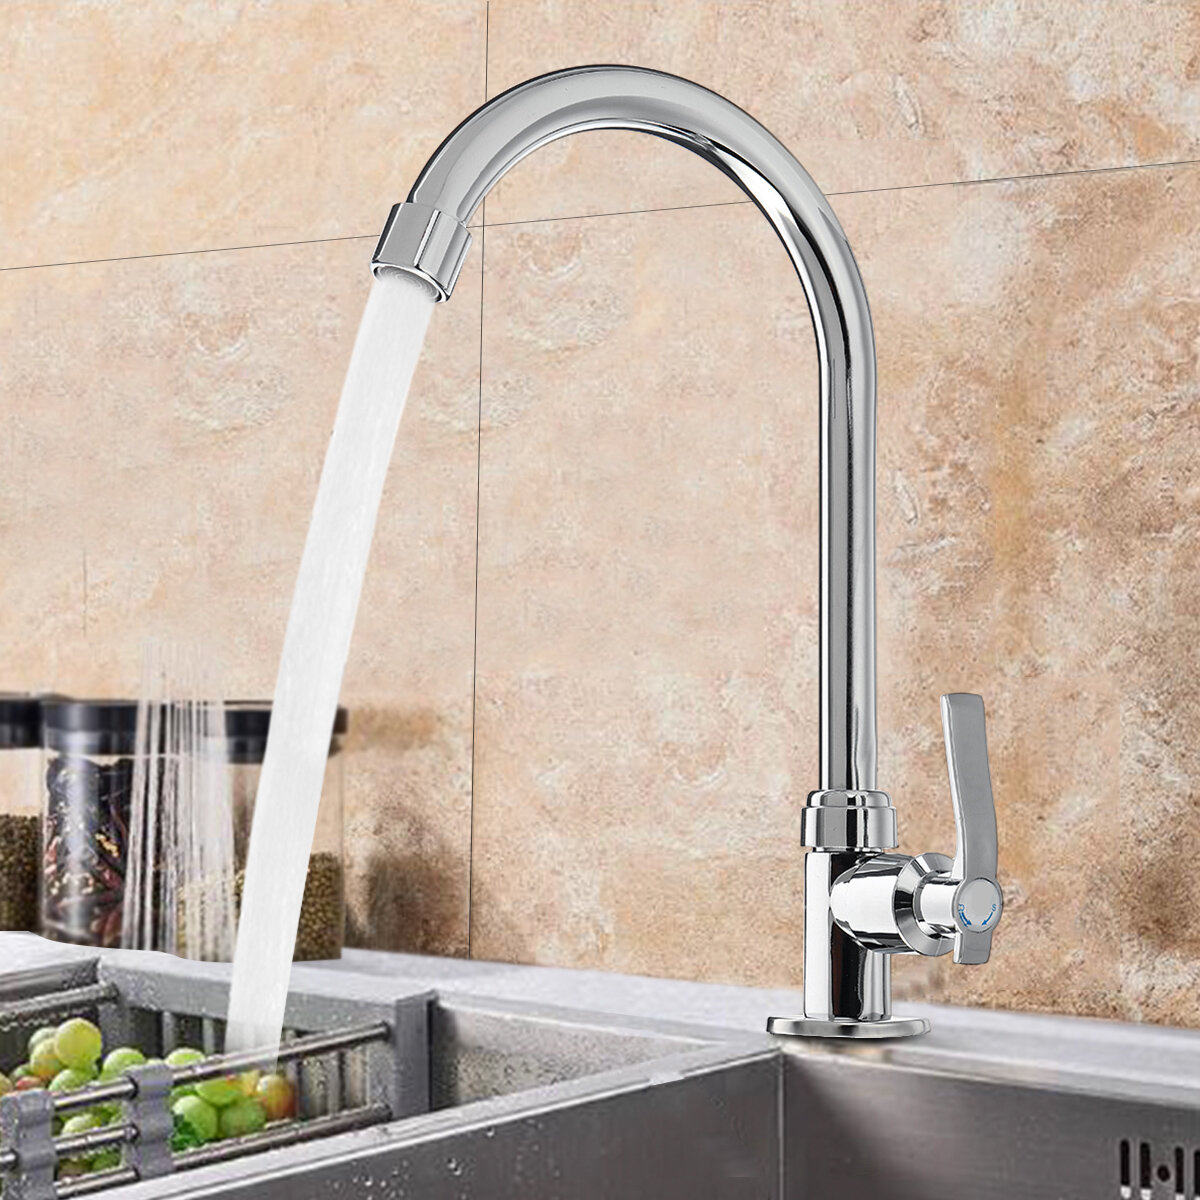 

360 Degree Rotation Single Cold Faucet Brass Kitchen Sink Vertical Faucet